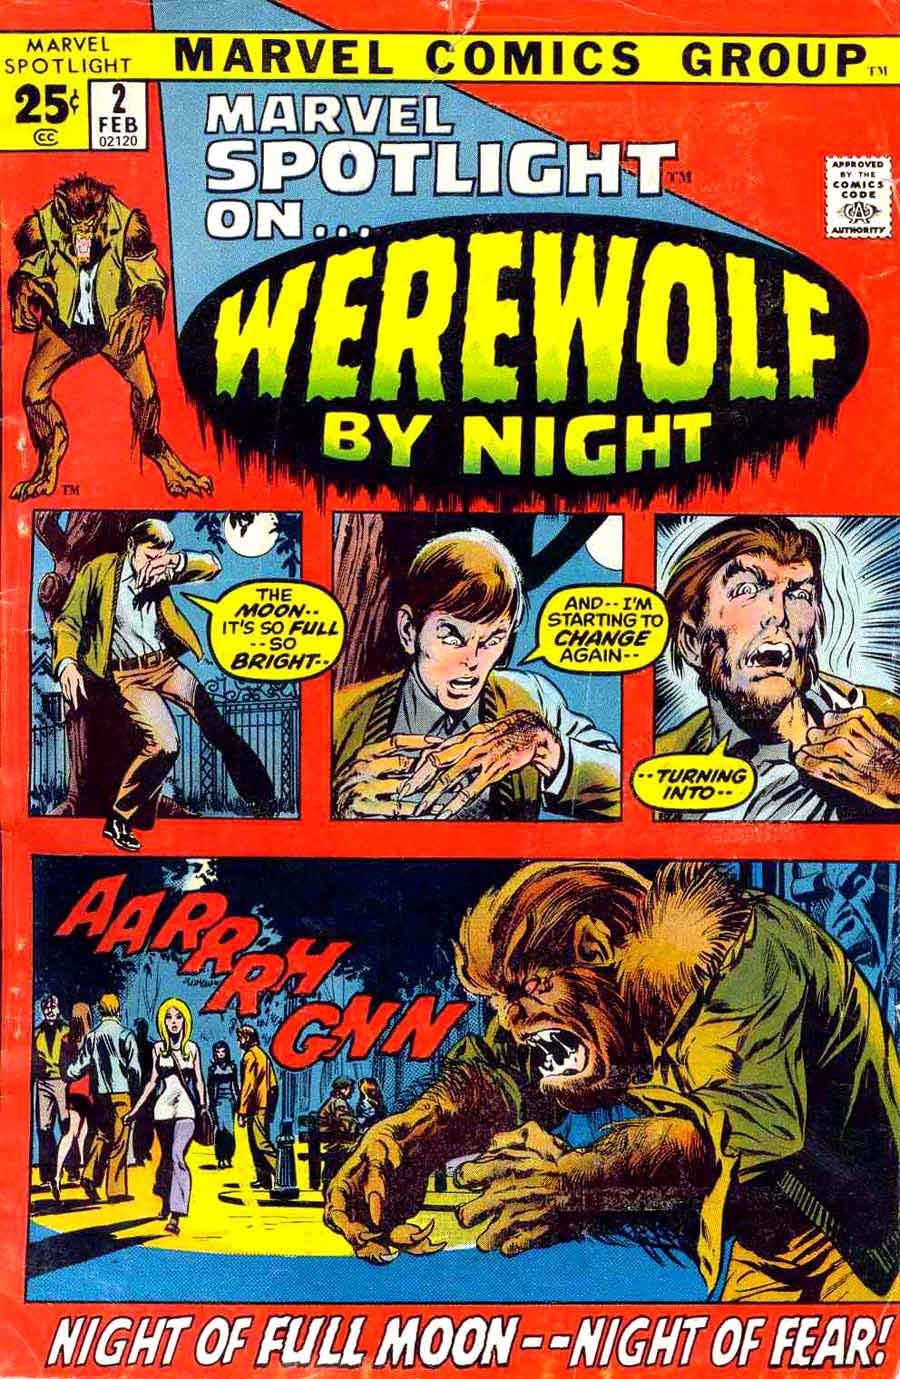 Marvel Spotlight #2 key issue 1970s bronze age neal adams comic book cover - 1st appearance Werewolf by Night